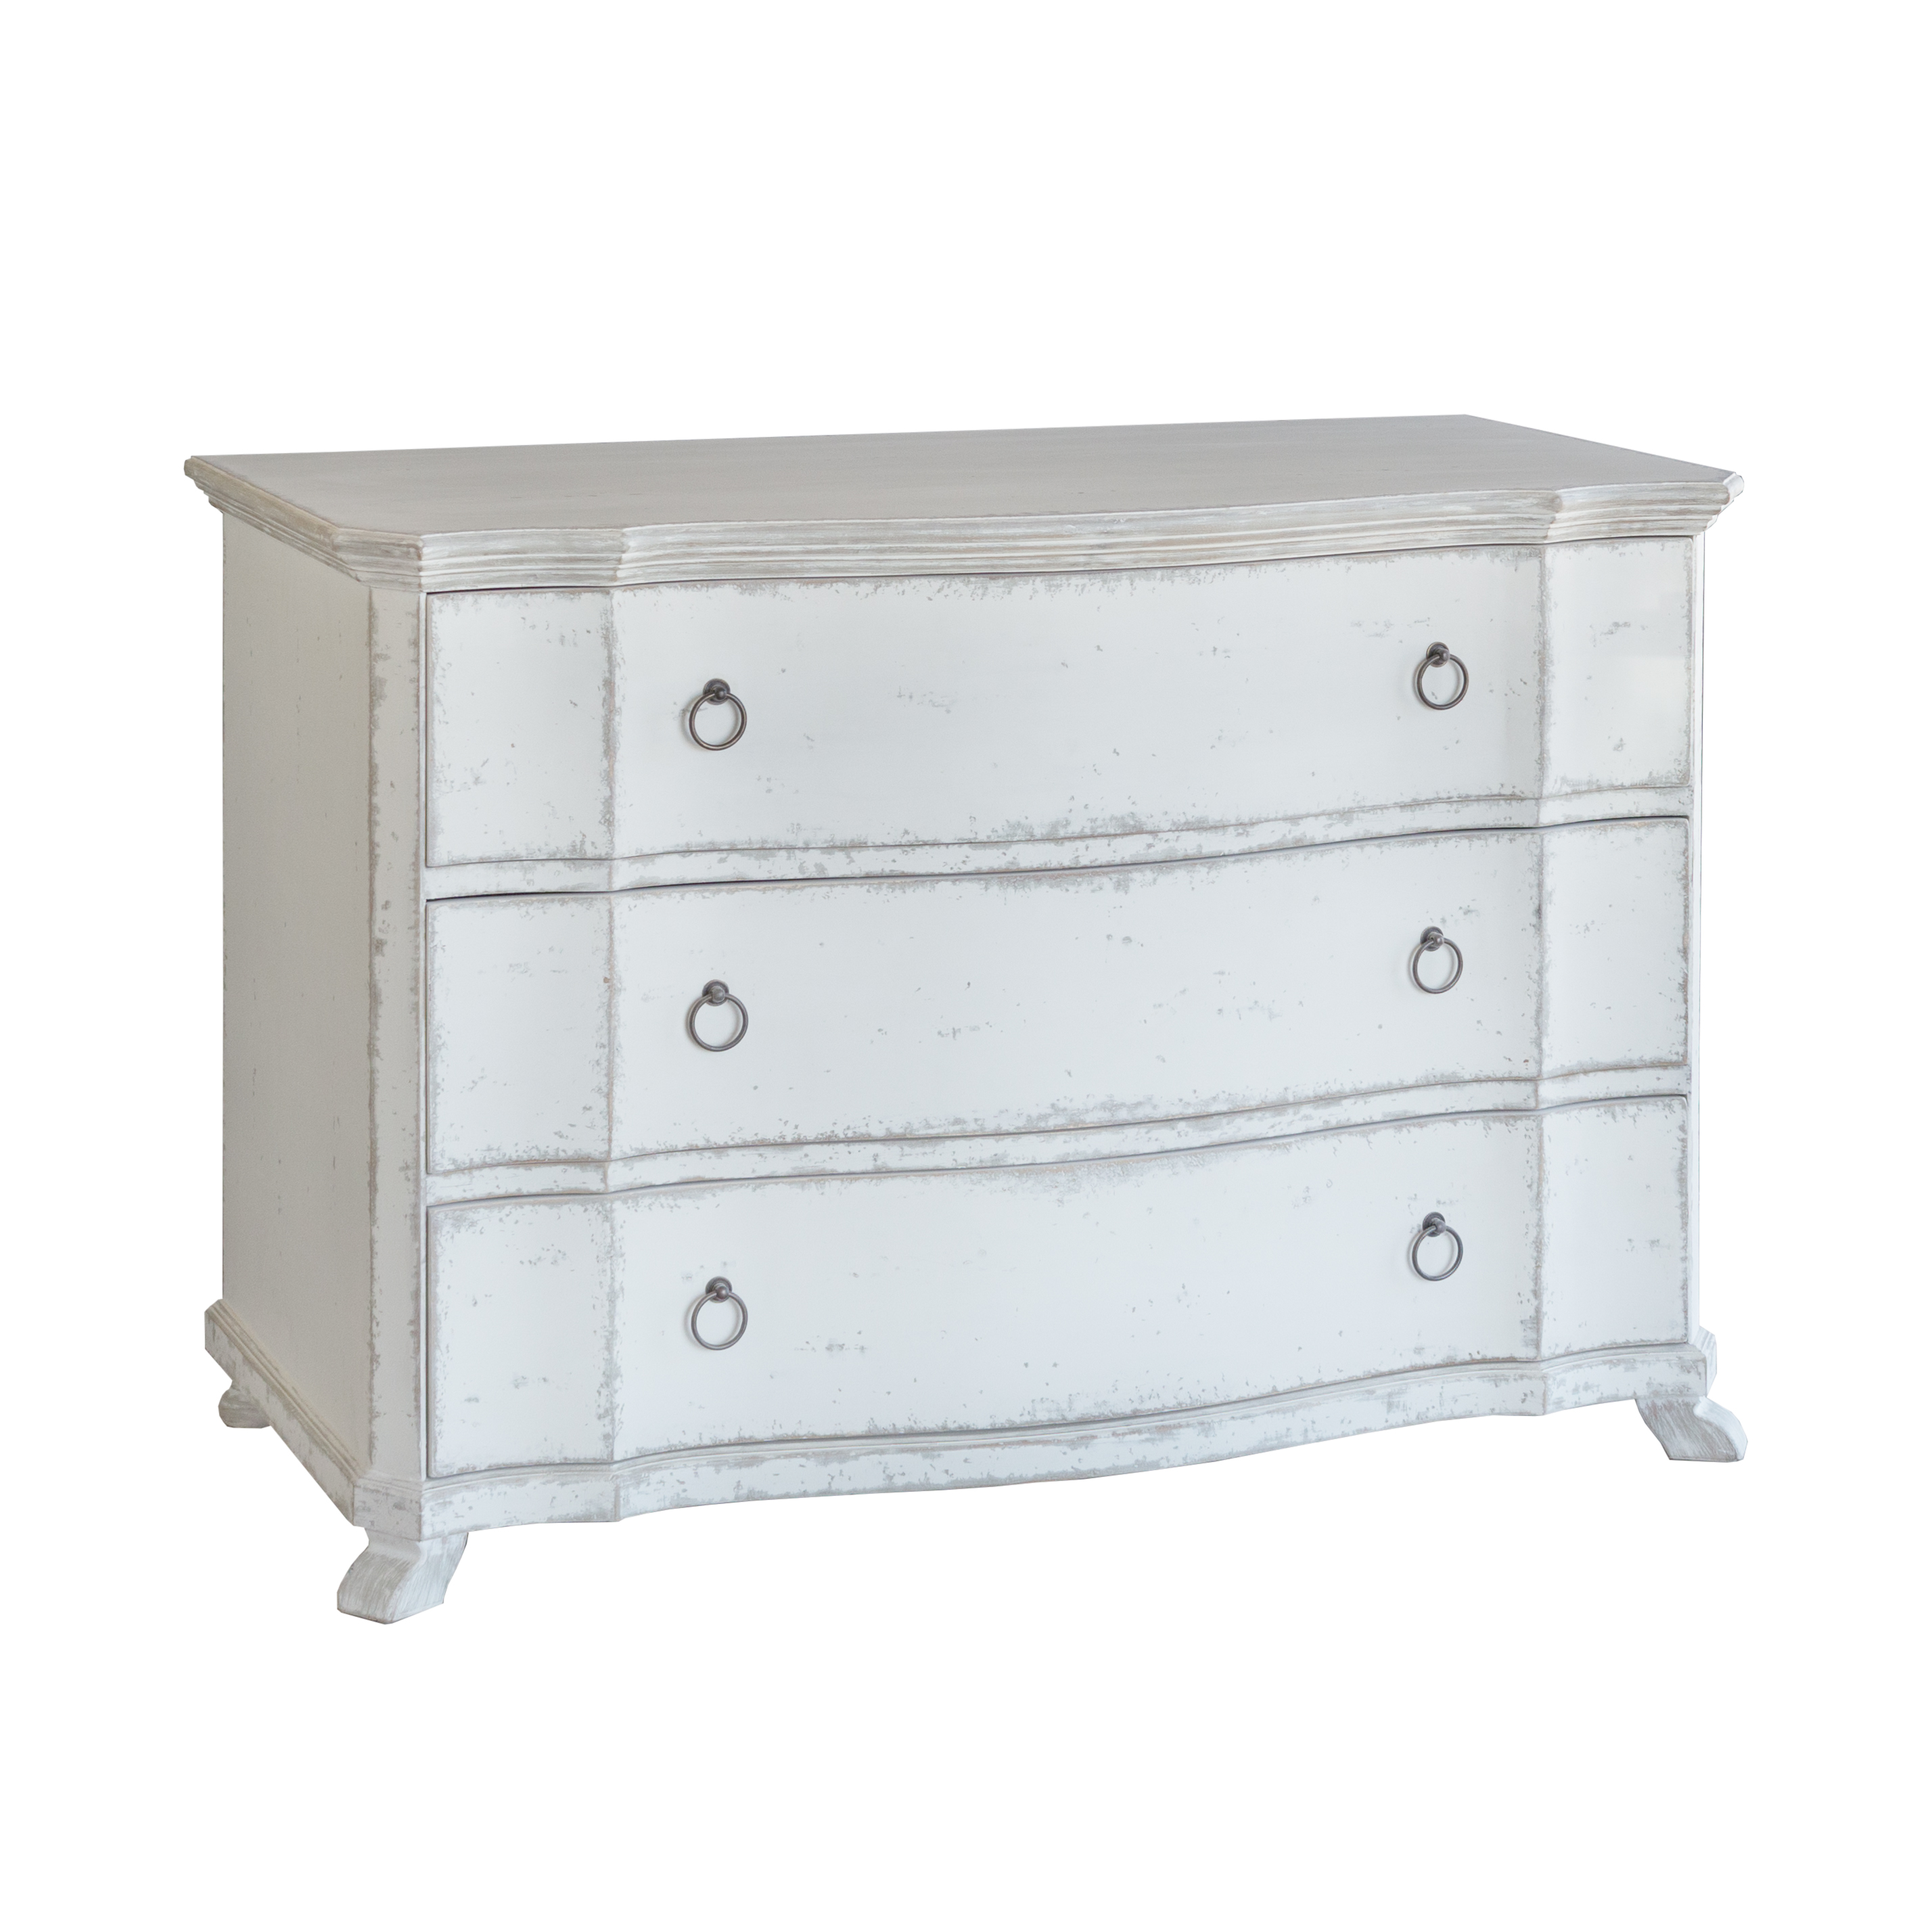 Eloquence® | Grande Bordeaux Commode in Stone Finish